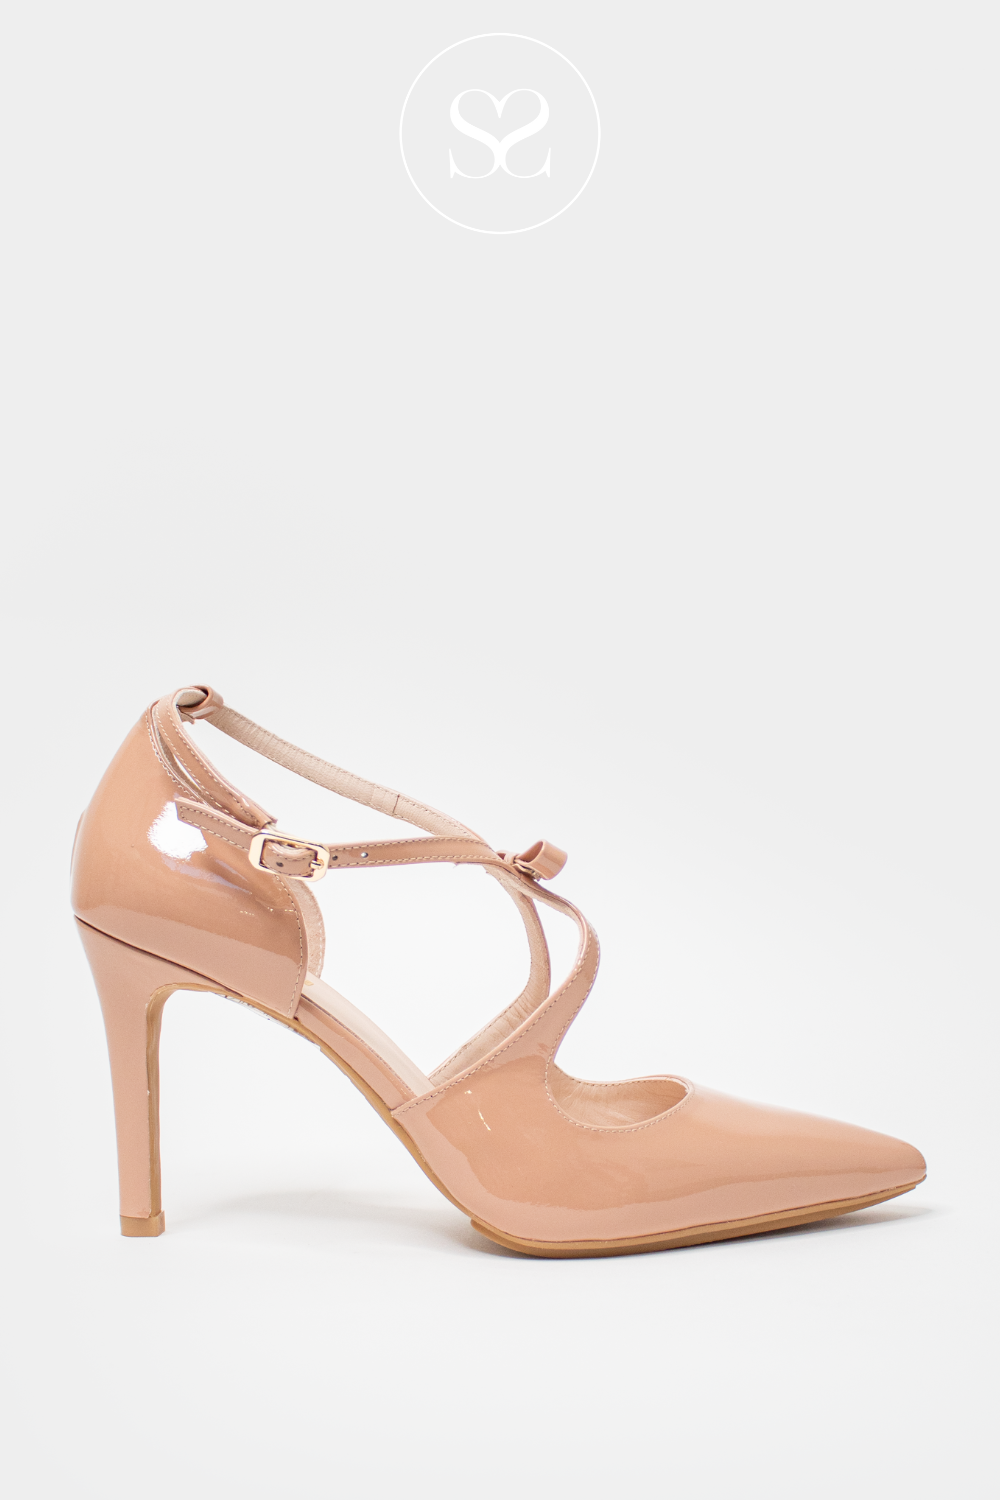 LODI REVECON NUDE PATENT POINTED TOE HIGH HEEL STILETTO WITH V-CUT CRISS CROSS STRAPS WITH BOW